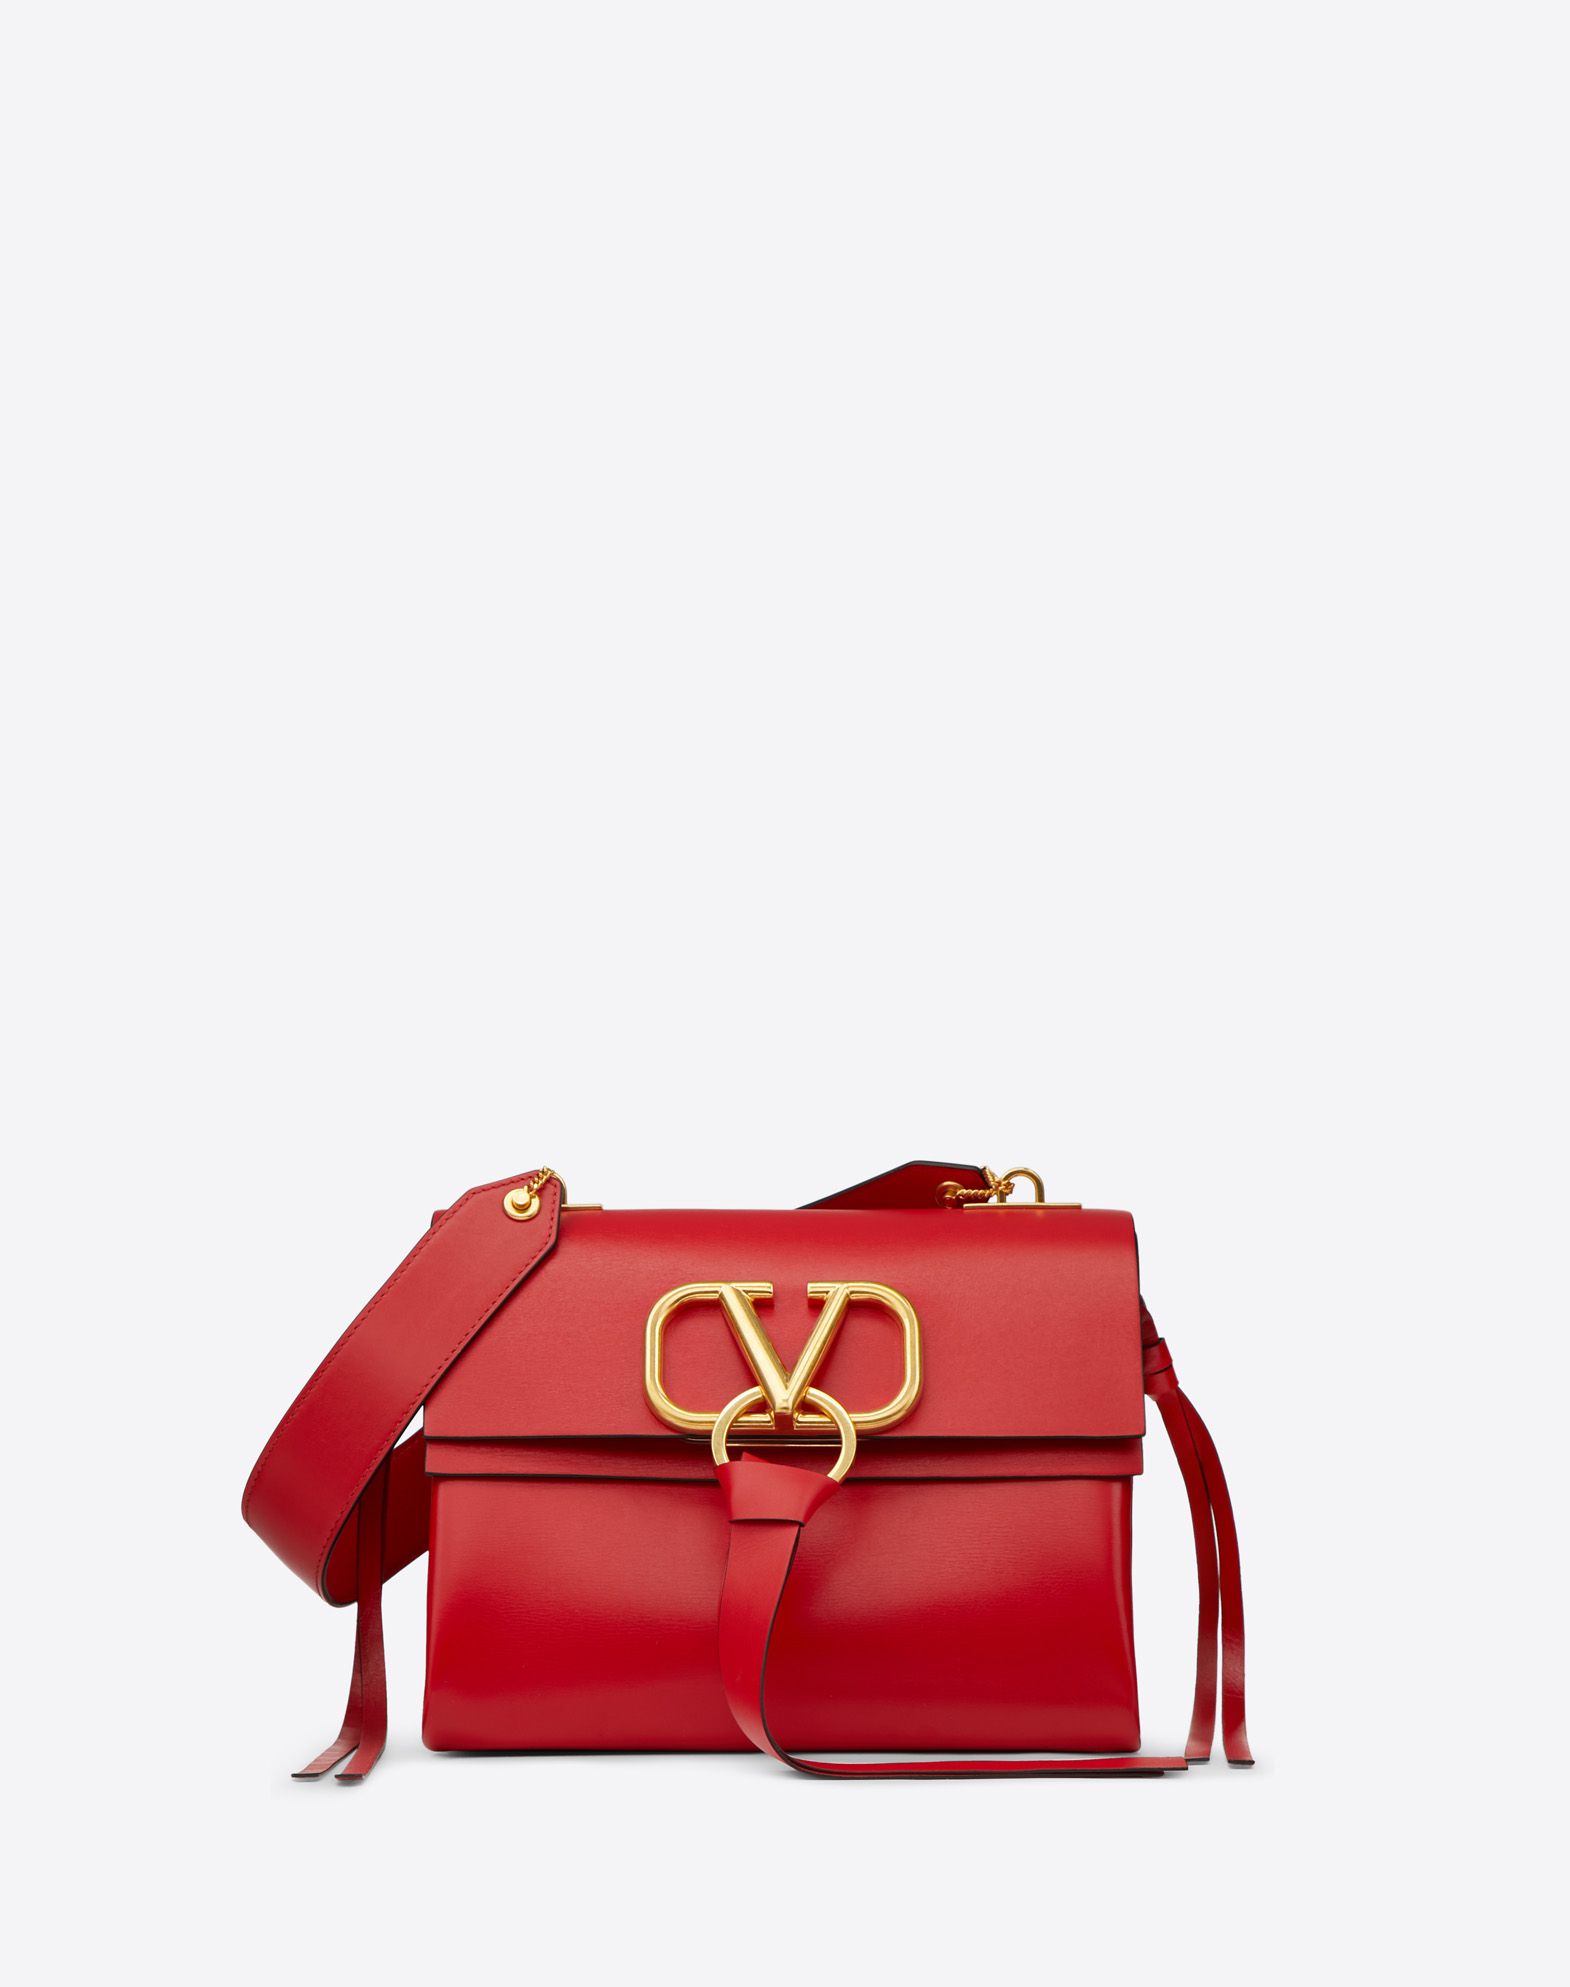 Valentino Vring Red Tote Bag